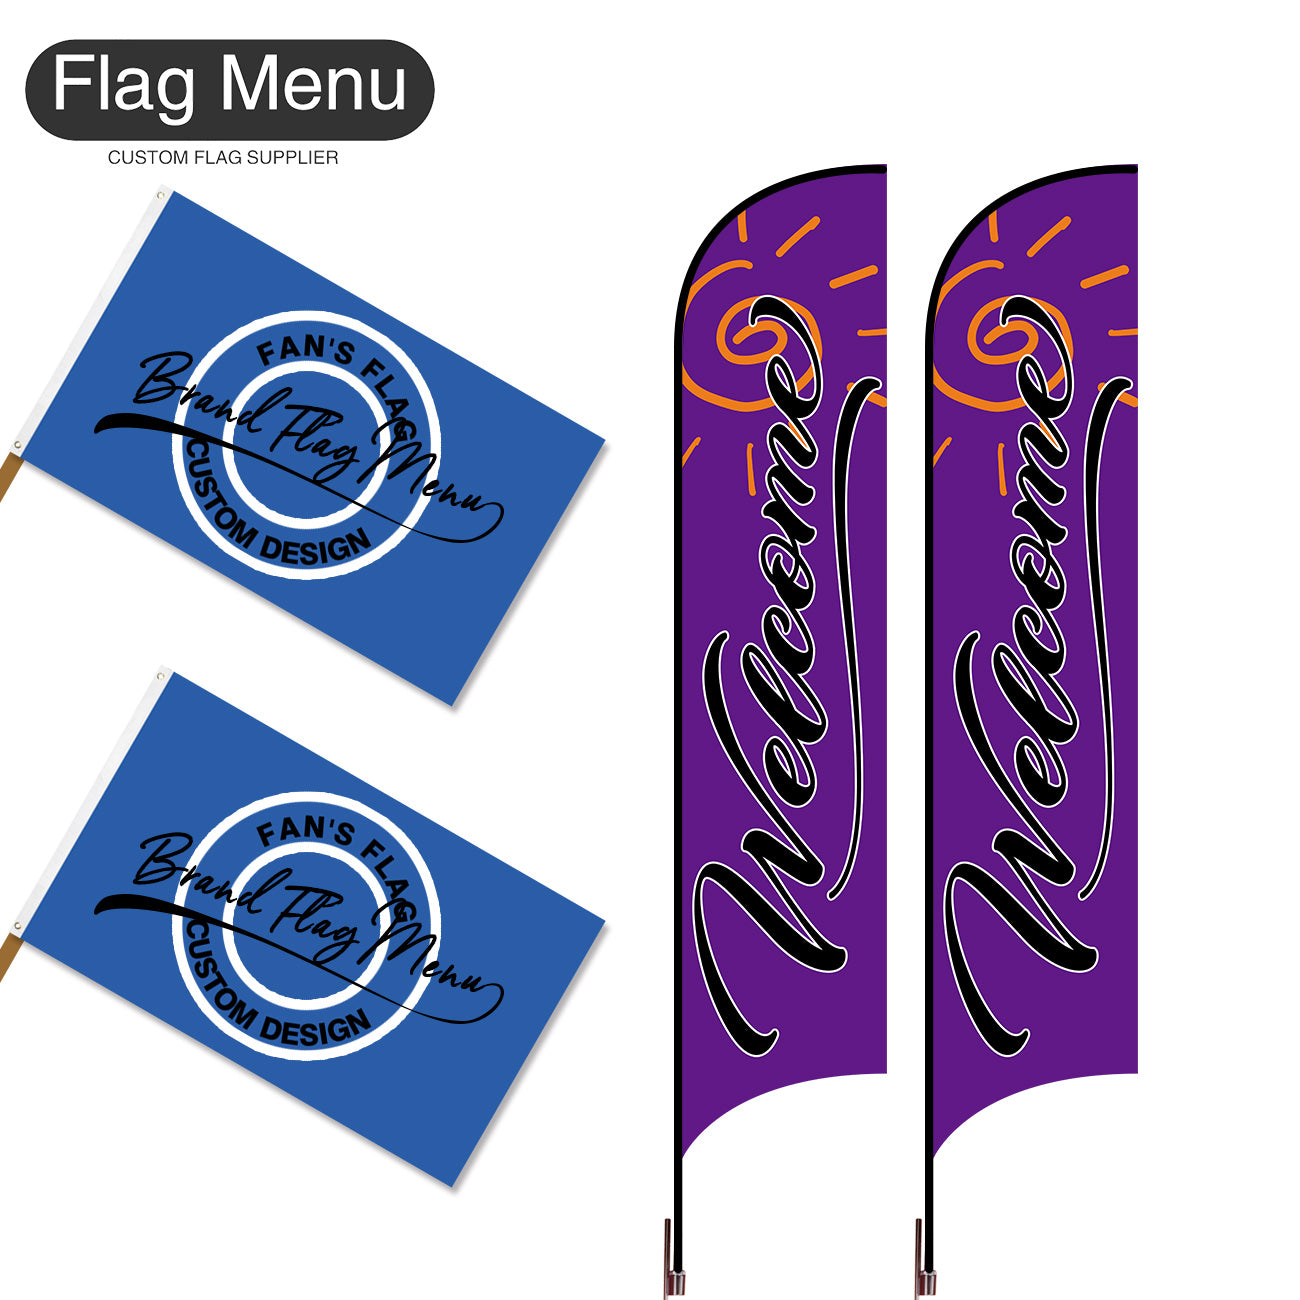 Outdoor Advertising Set - D-Purple B-S - Feather Flag -Double Sided & 3'x5' Regular Flag -Single Sided-Cross & Water Bag-Flag Menu